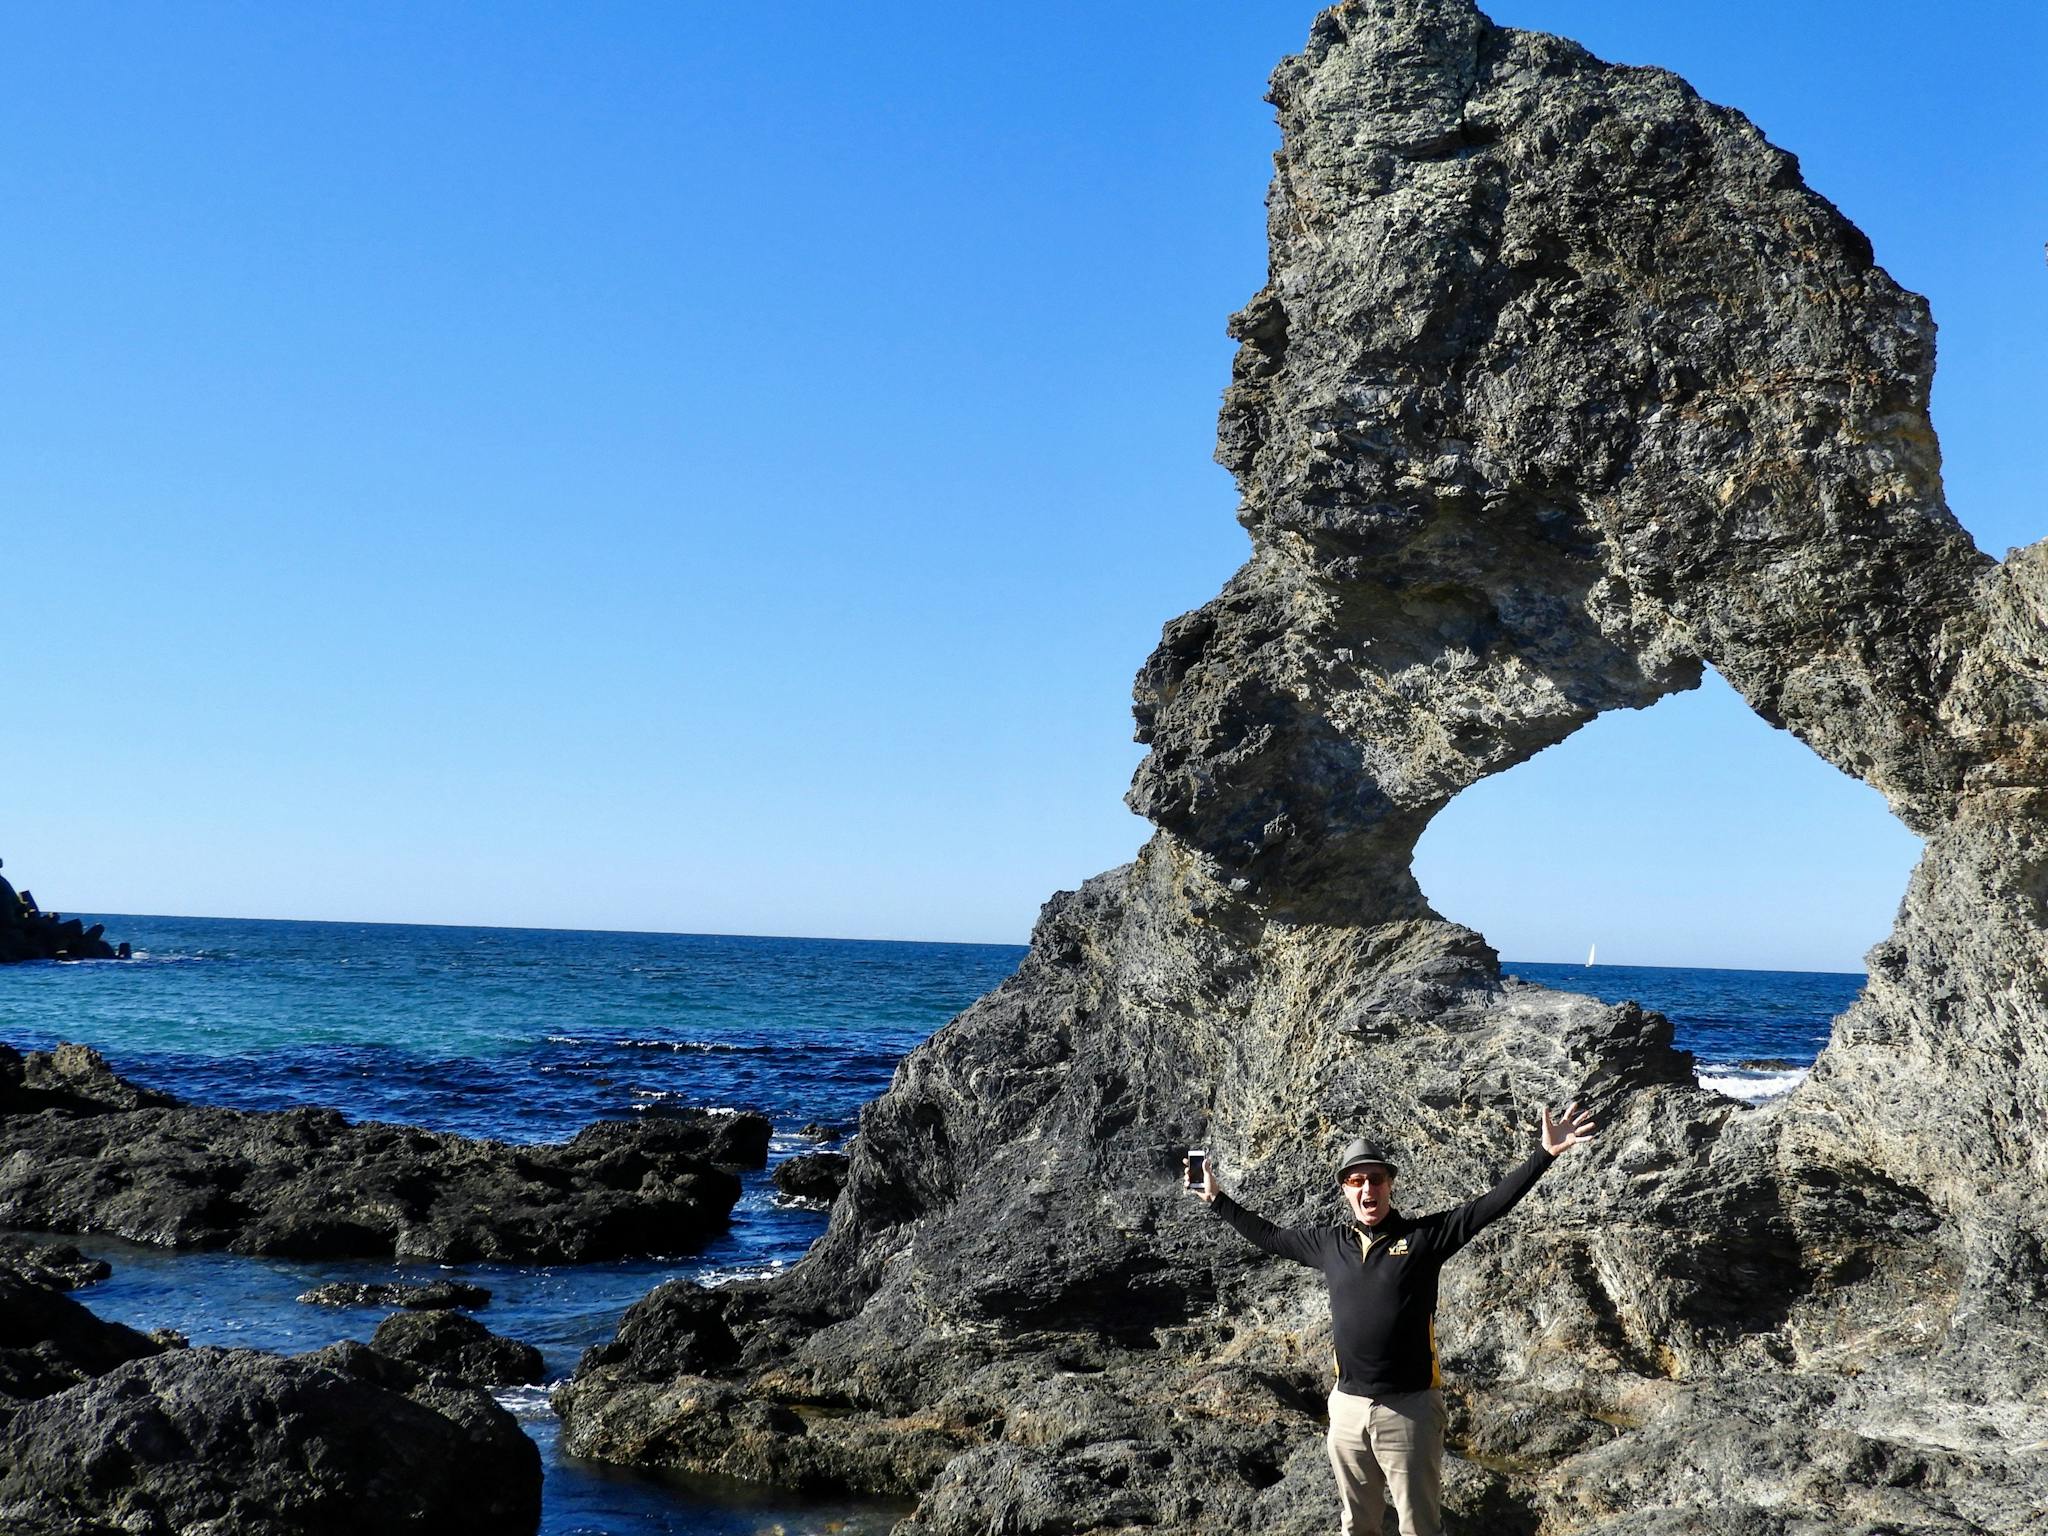 Visit the iconic Australia Rock while visiting the Narooma Fur Seals